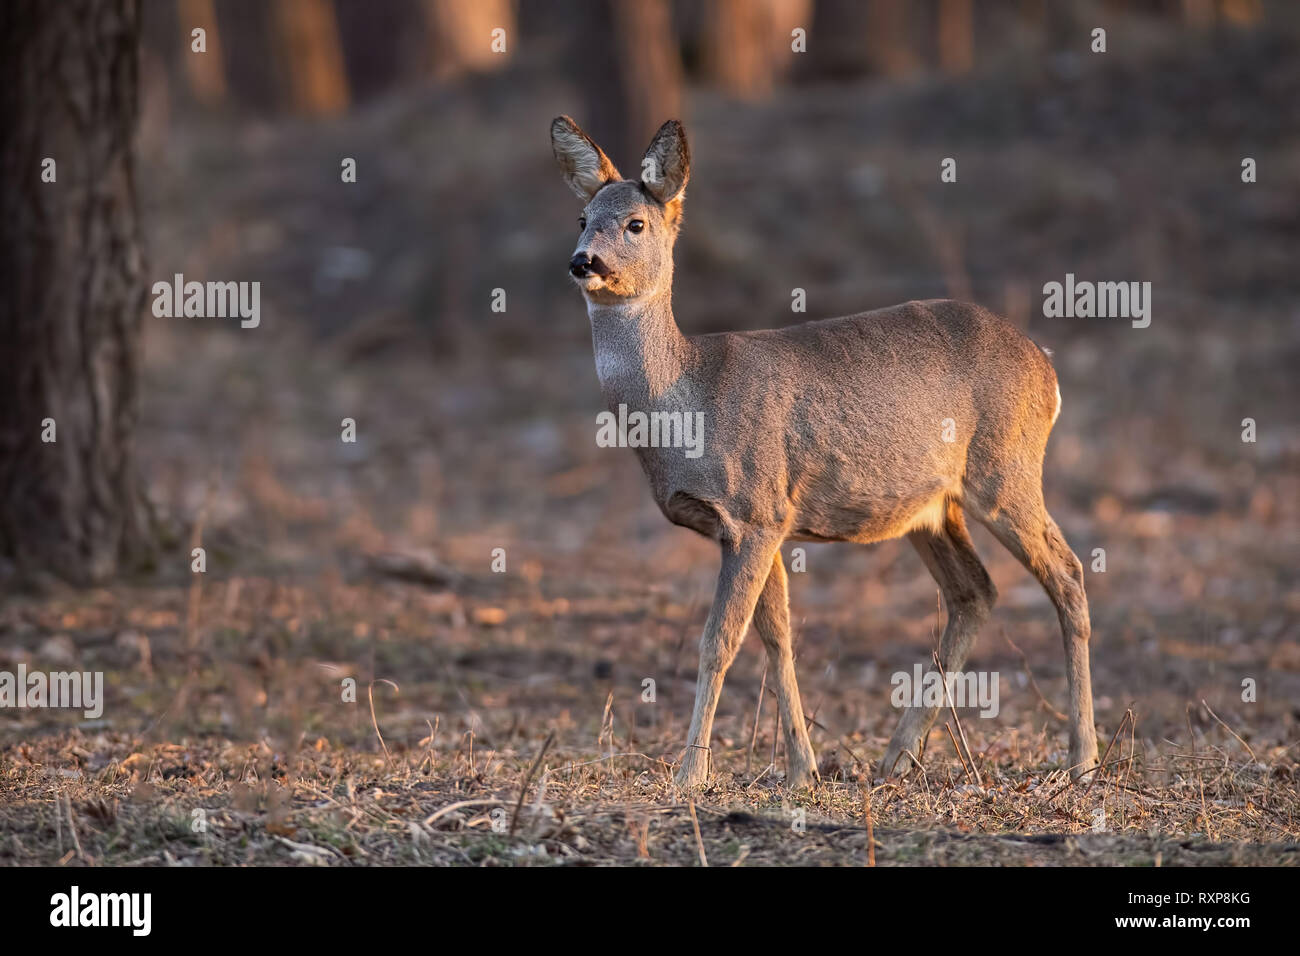 Roe deer, capreolus capreolus, doe walking through a forest at sunset. Stock Photo